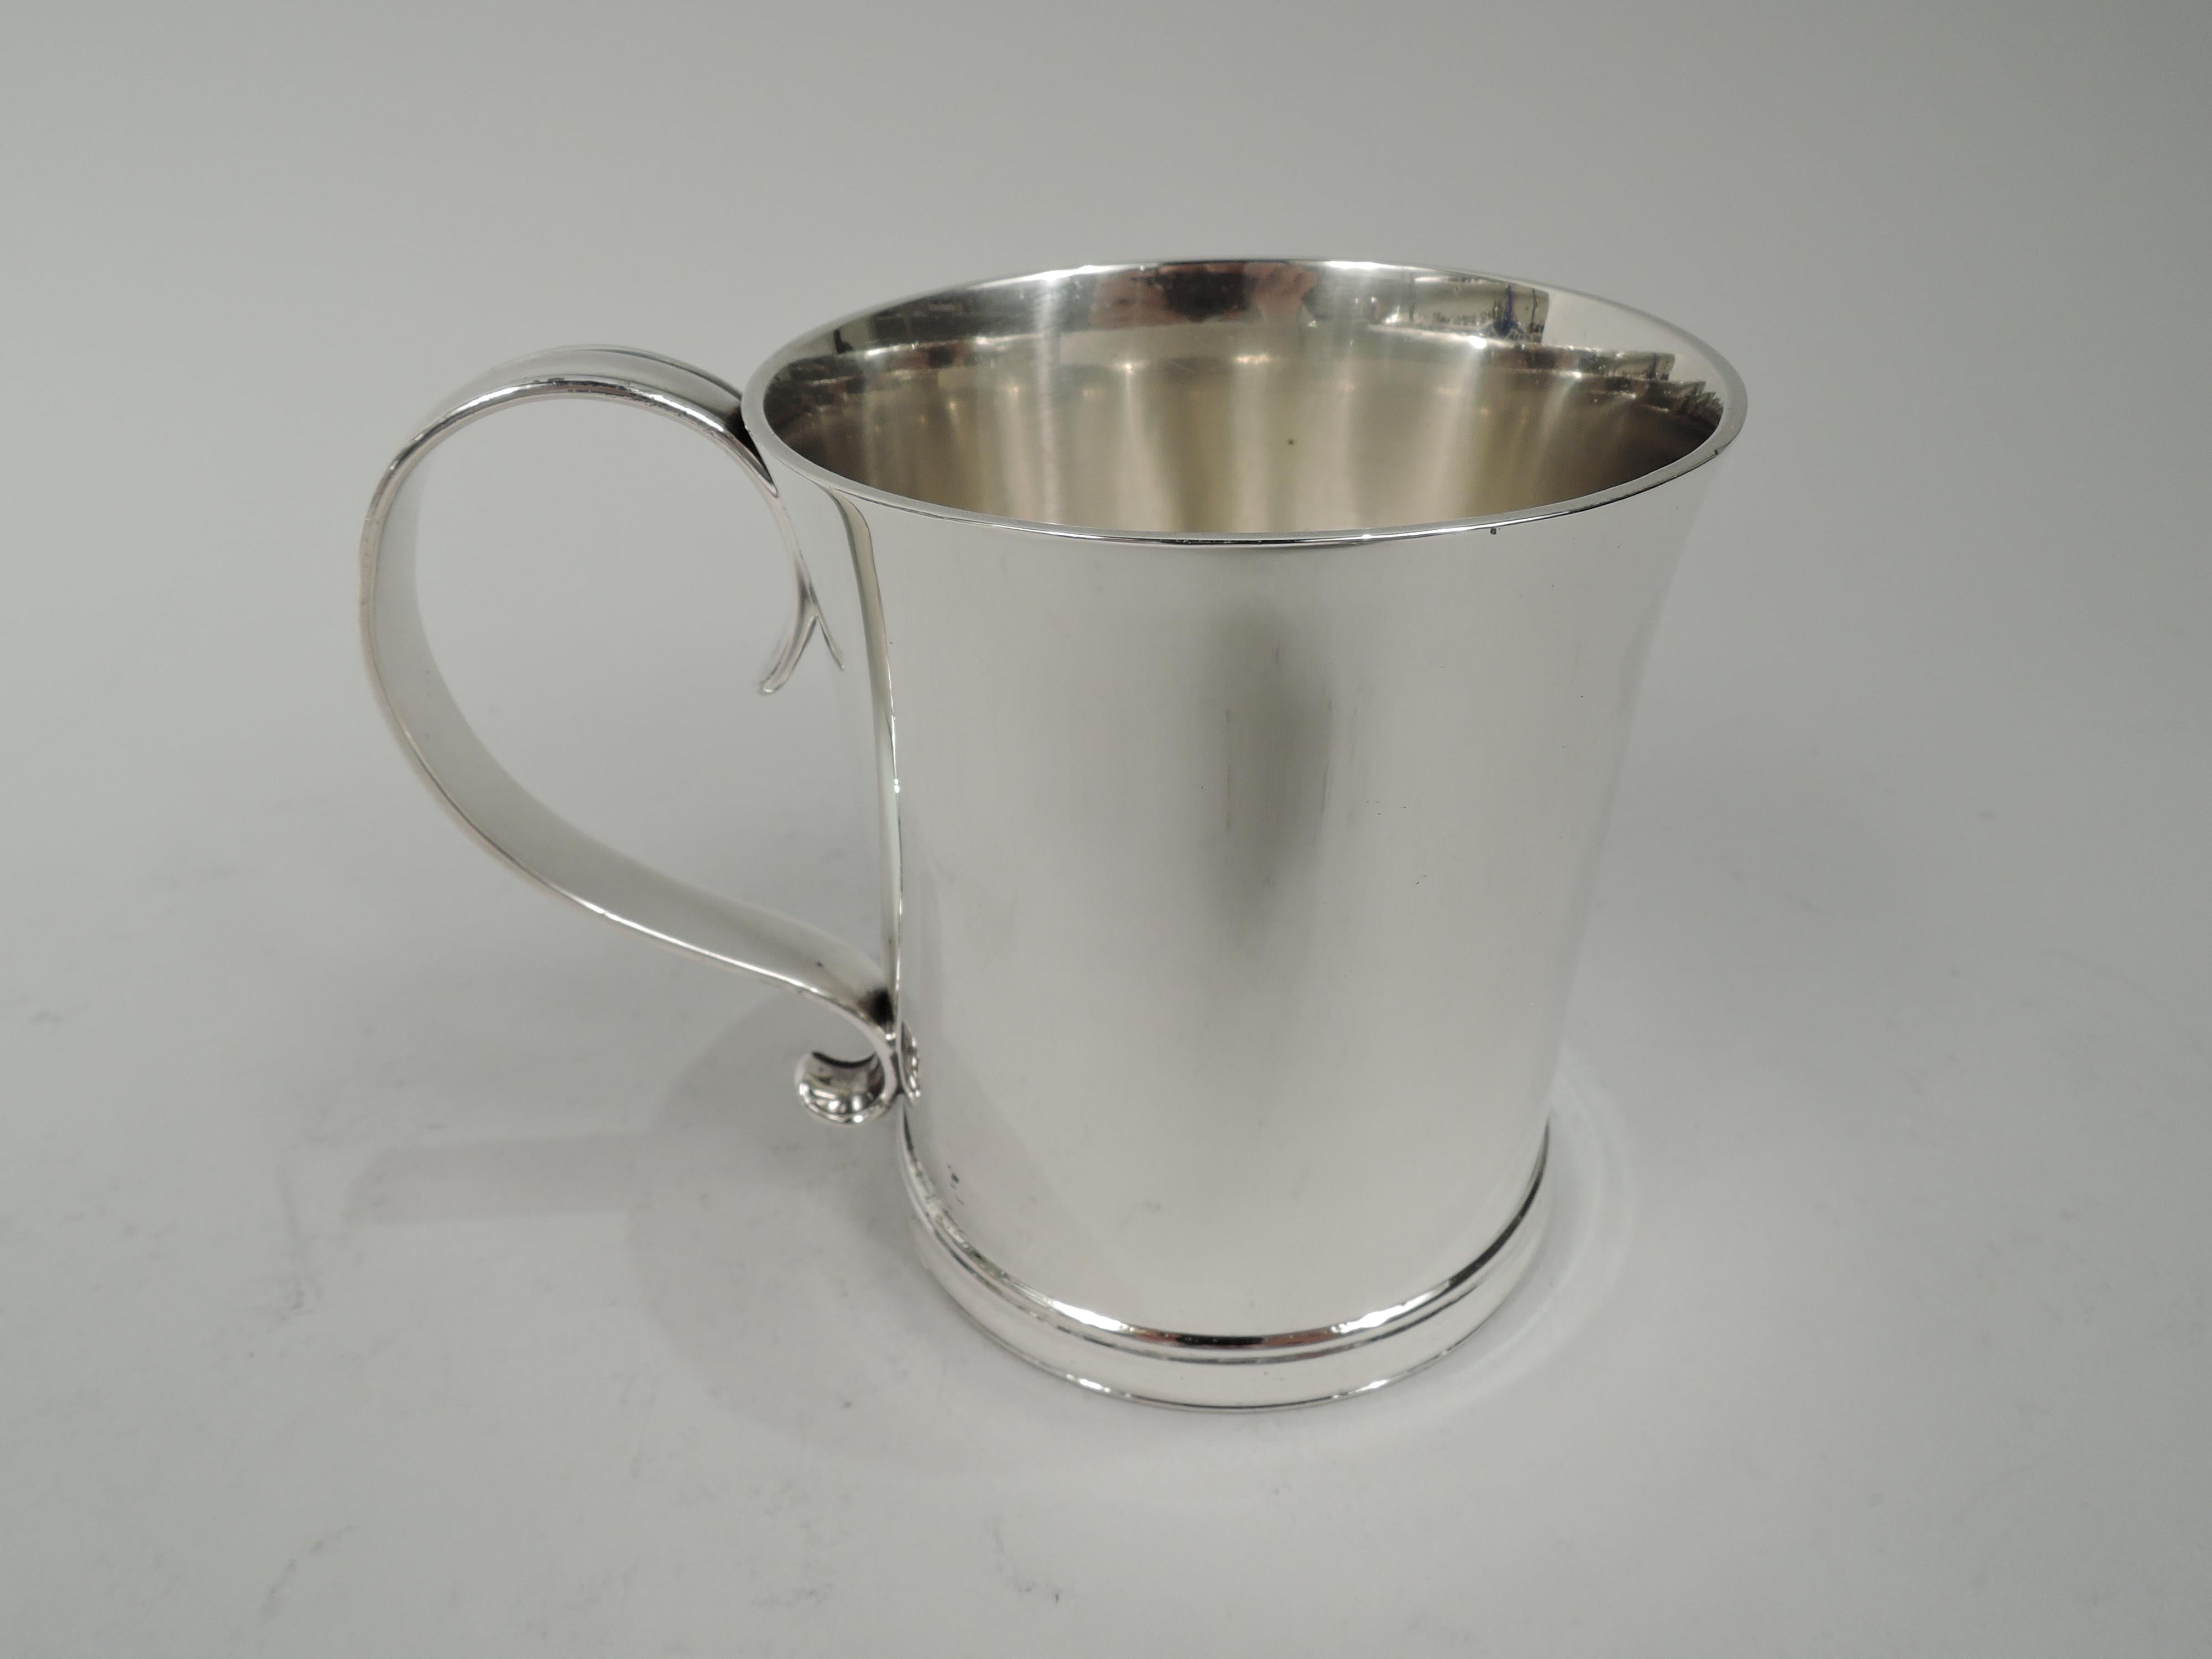 Colonial Revival sterling silver baby cup. Made by Tiffany & Co. in New York, ca 1916. Straight sides with gently flared rim, s-scroll handle and molded base. Lots of room for engraving. Fully marked including maker’s stamp, pattern no. 19184 (first